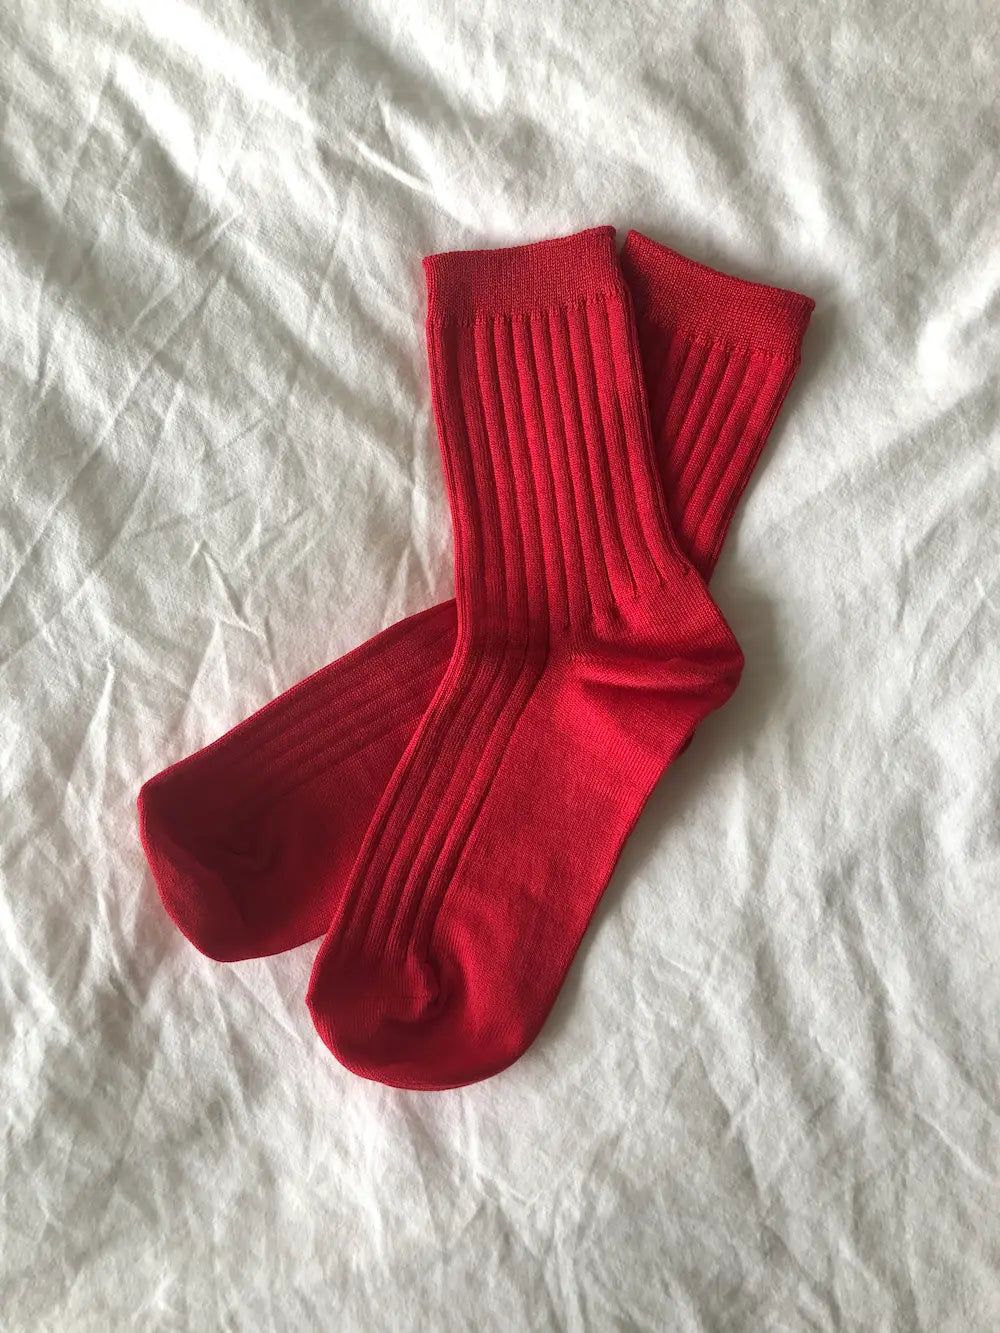 Her Socks, Classic Red